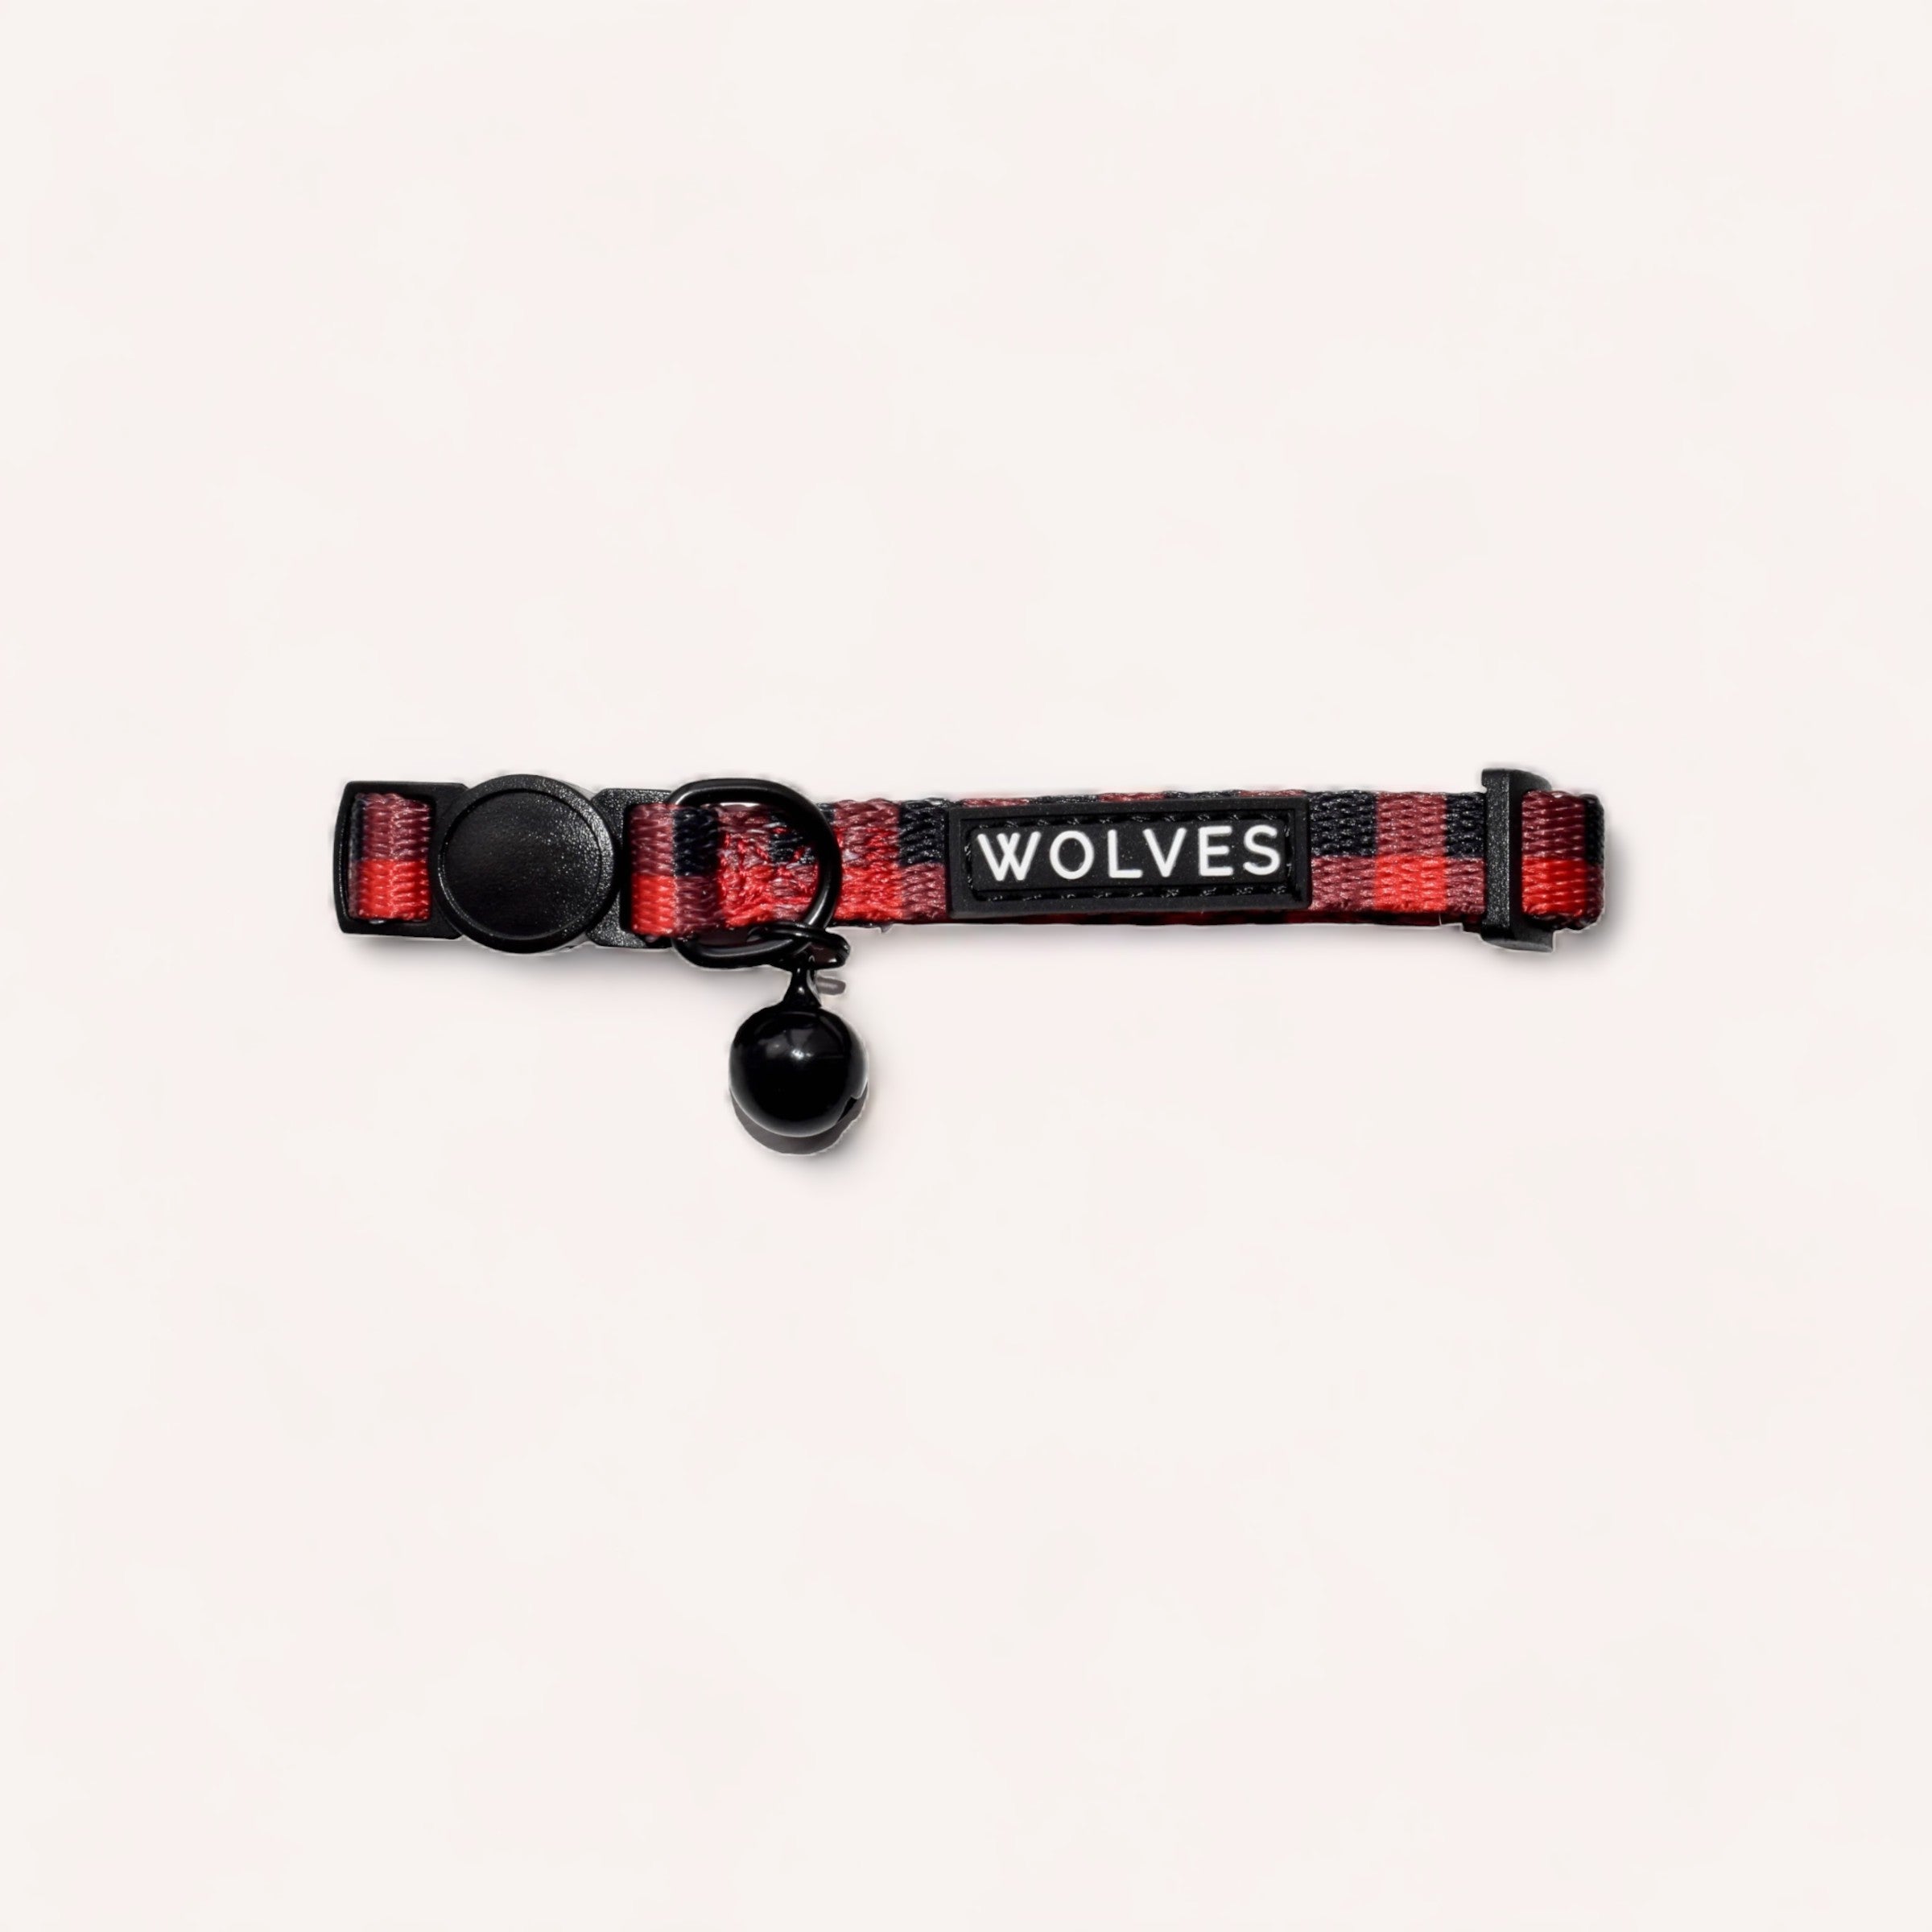 A red and black adjustable dog collar with a breakaway buckle, featuring the word "Buffalo" on a label by Wolves of Wellington.